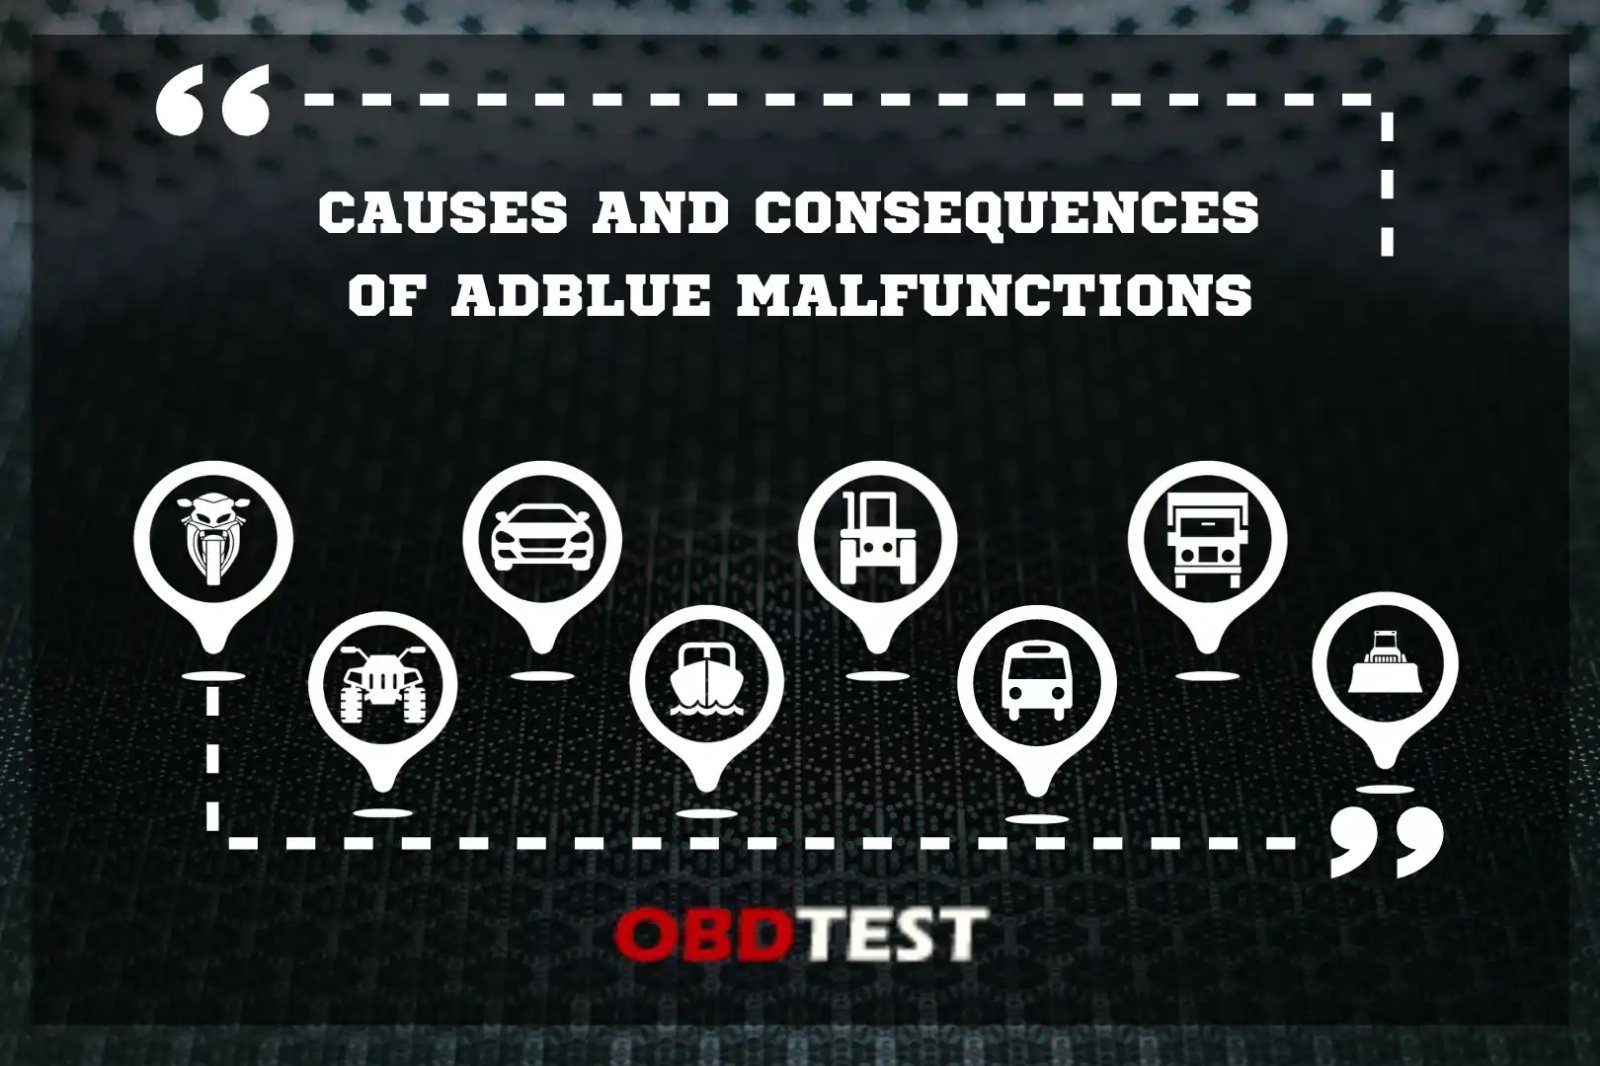 Causes and consequences of Adblue malfunctions